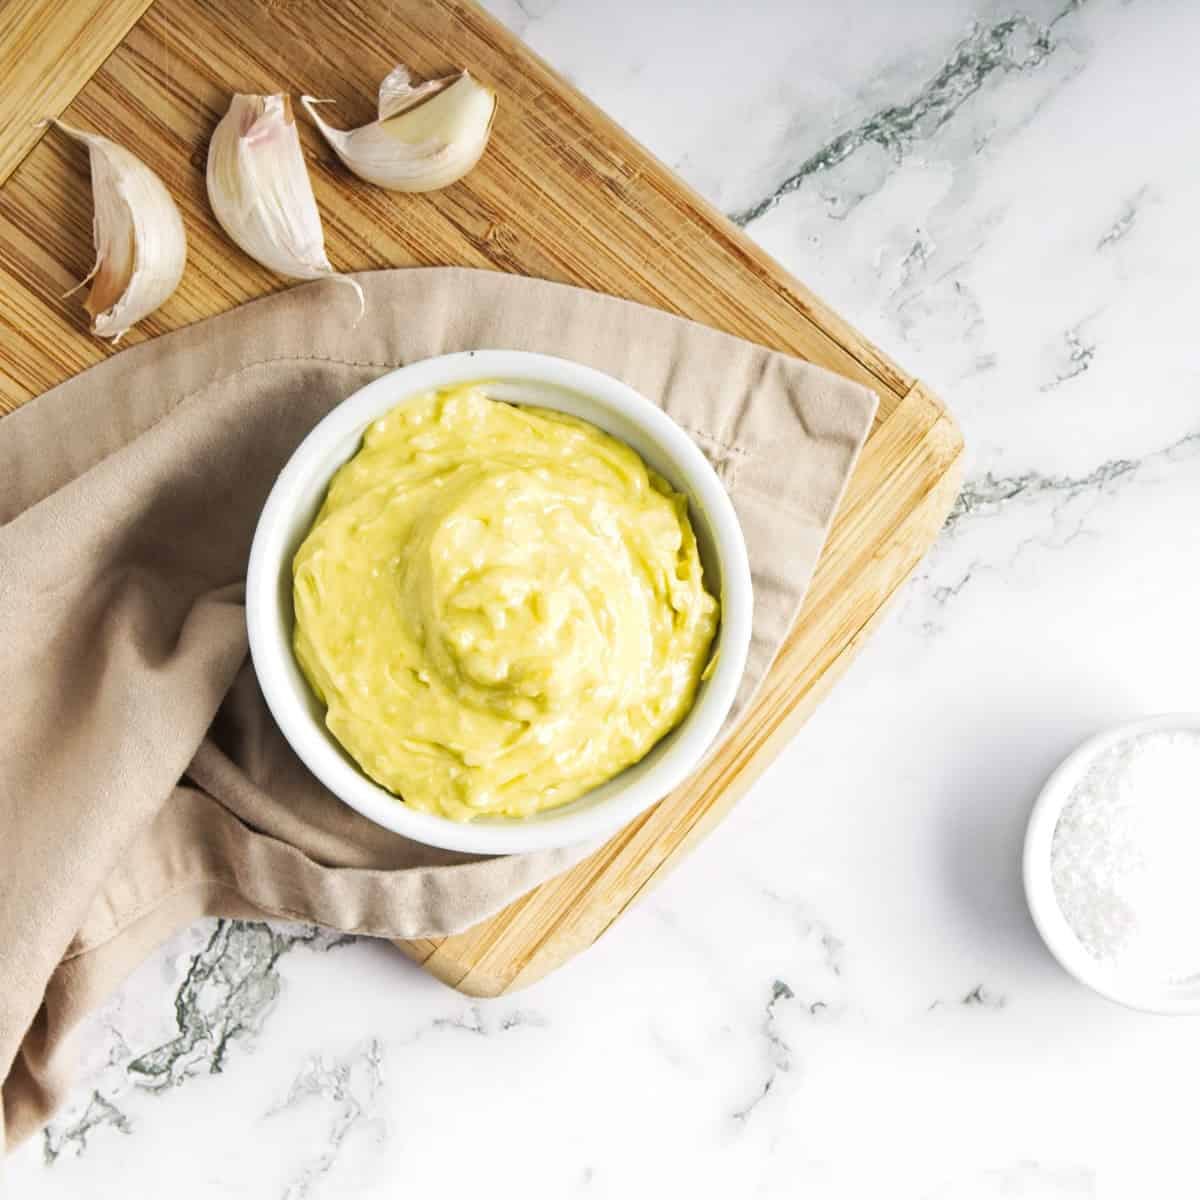 Garlic mayonnaise in small white ramekin on cutting board with tgarlic cloves on marble surface.